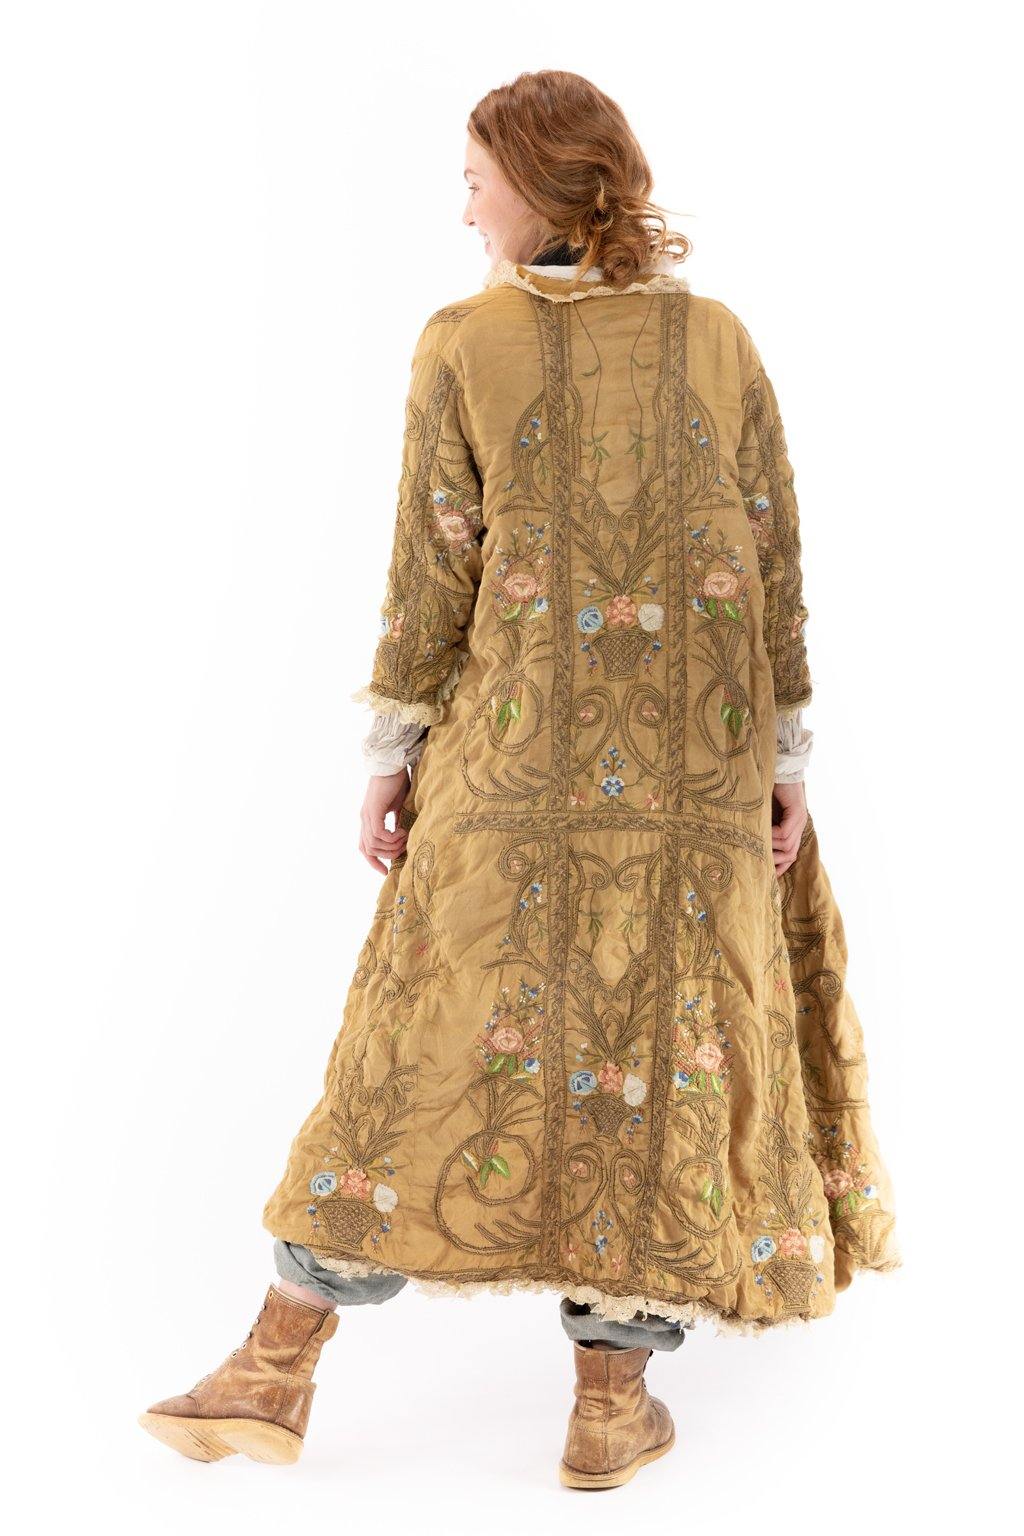 Magnolia Pearl Embroidered OLeary Coat Jacket 471 - Baltic Amber